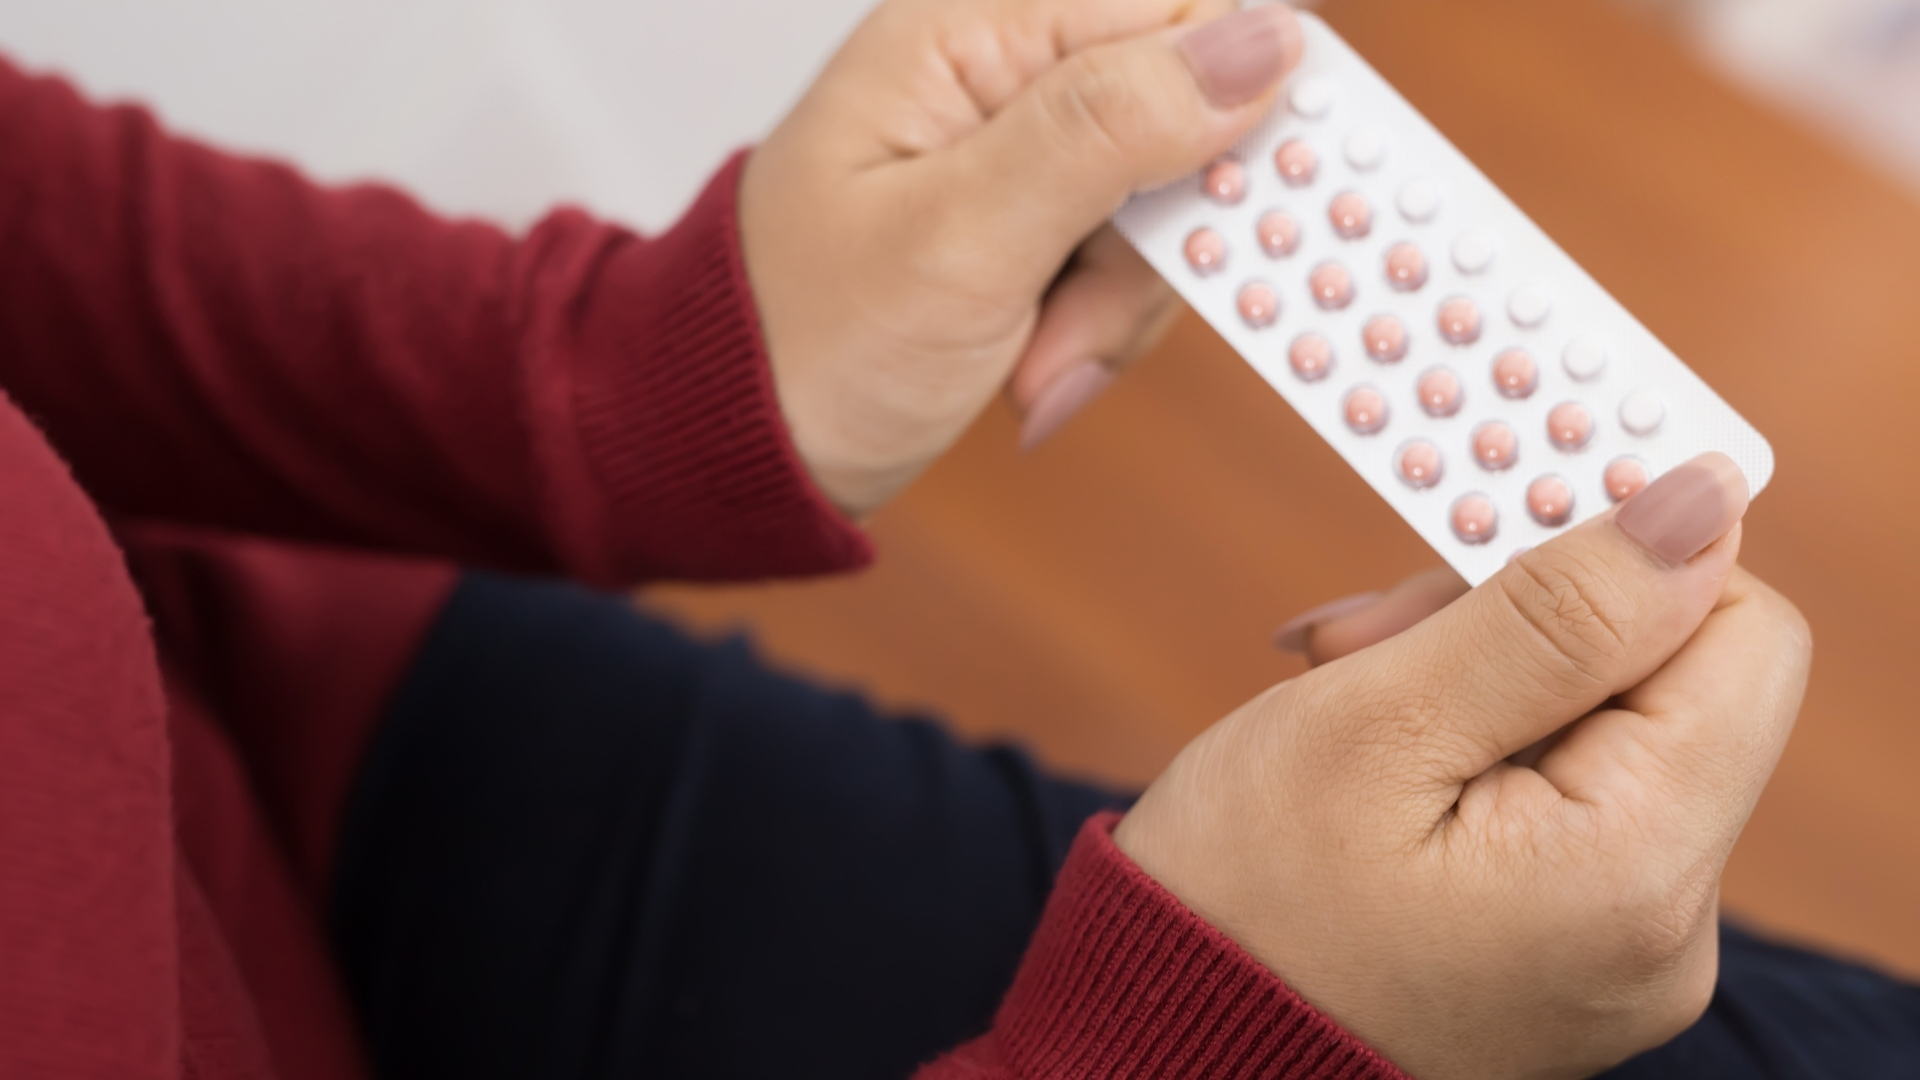 Why I Stopped Taking Birth Control